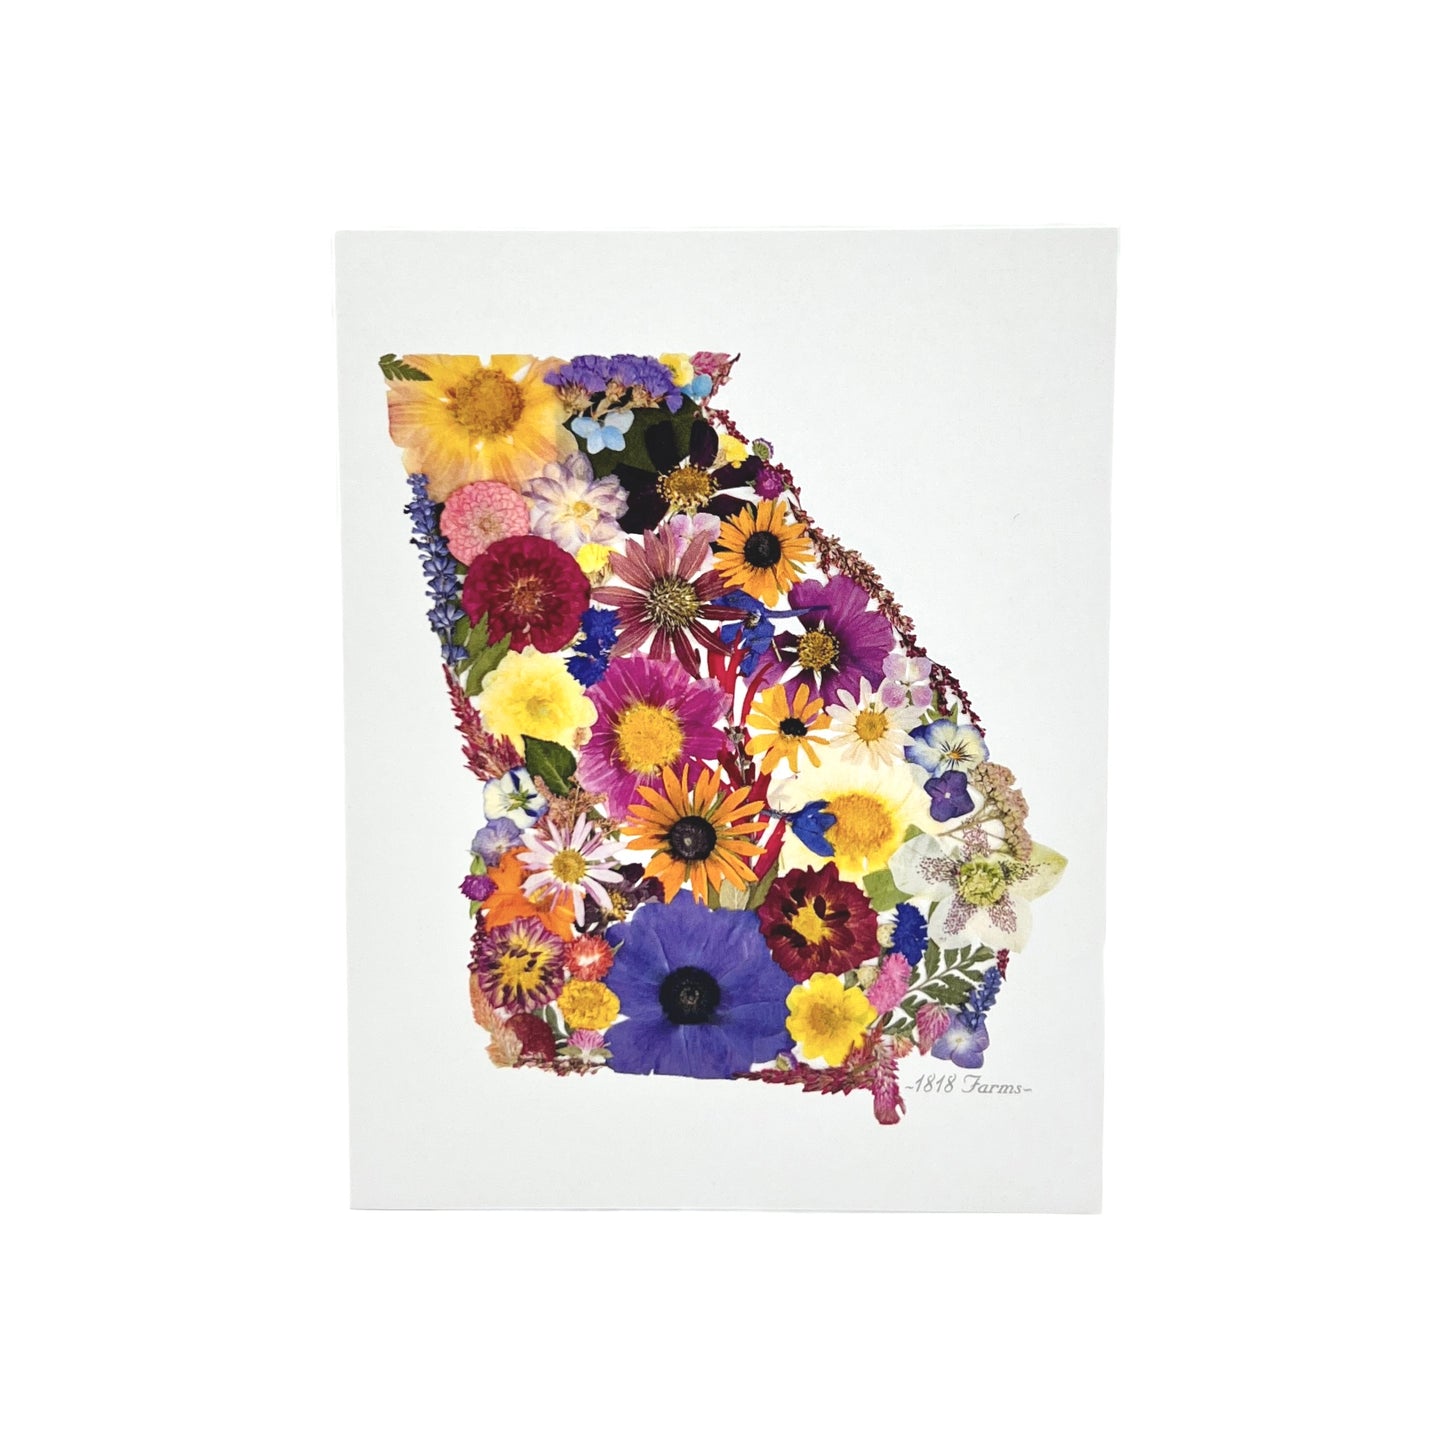 State Themed Notecards (Set of 6) Featuring Dried, Pressed Flowers - "Where I Bloom" Collection Notecard 1818 Farms Georgia  